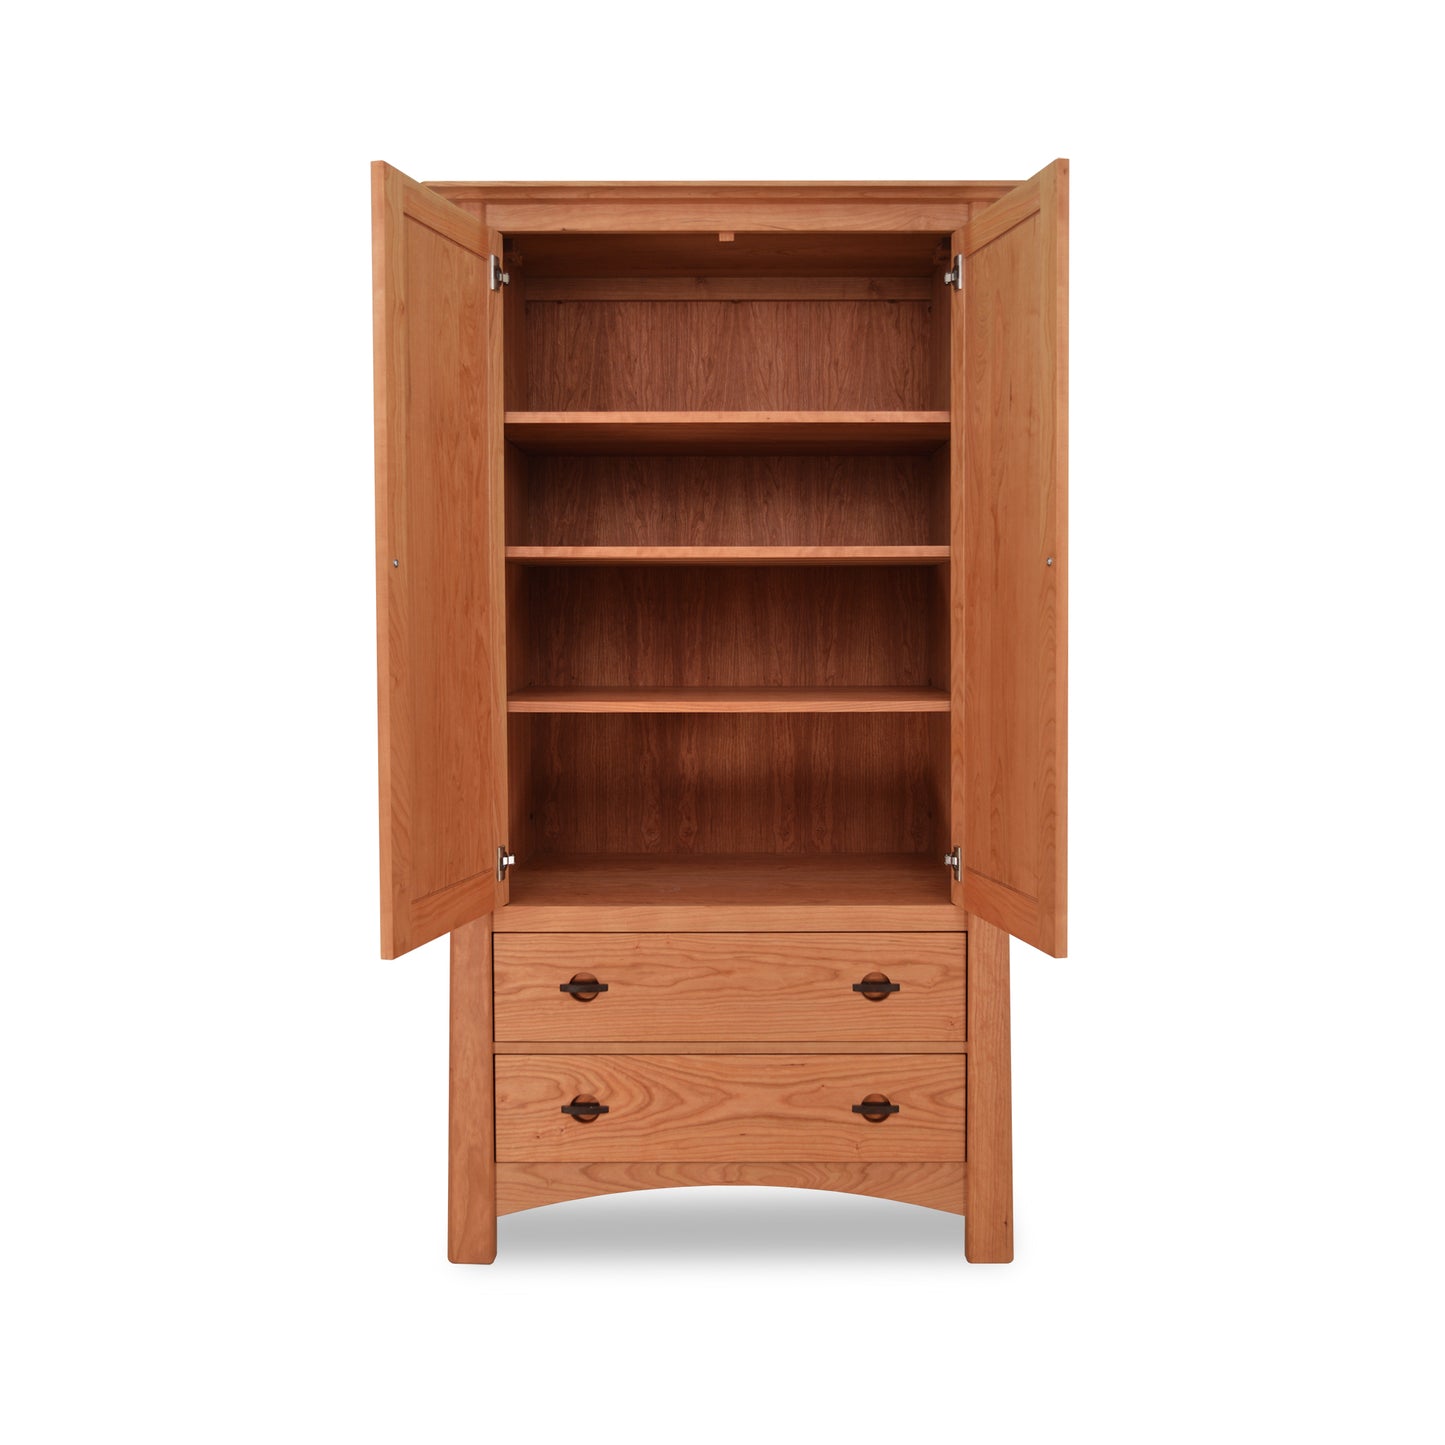 A Maple Corner Woodworks Cherry Moon Armoire with open doors, revealing four shelves and two lower drawers, set against a white background.